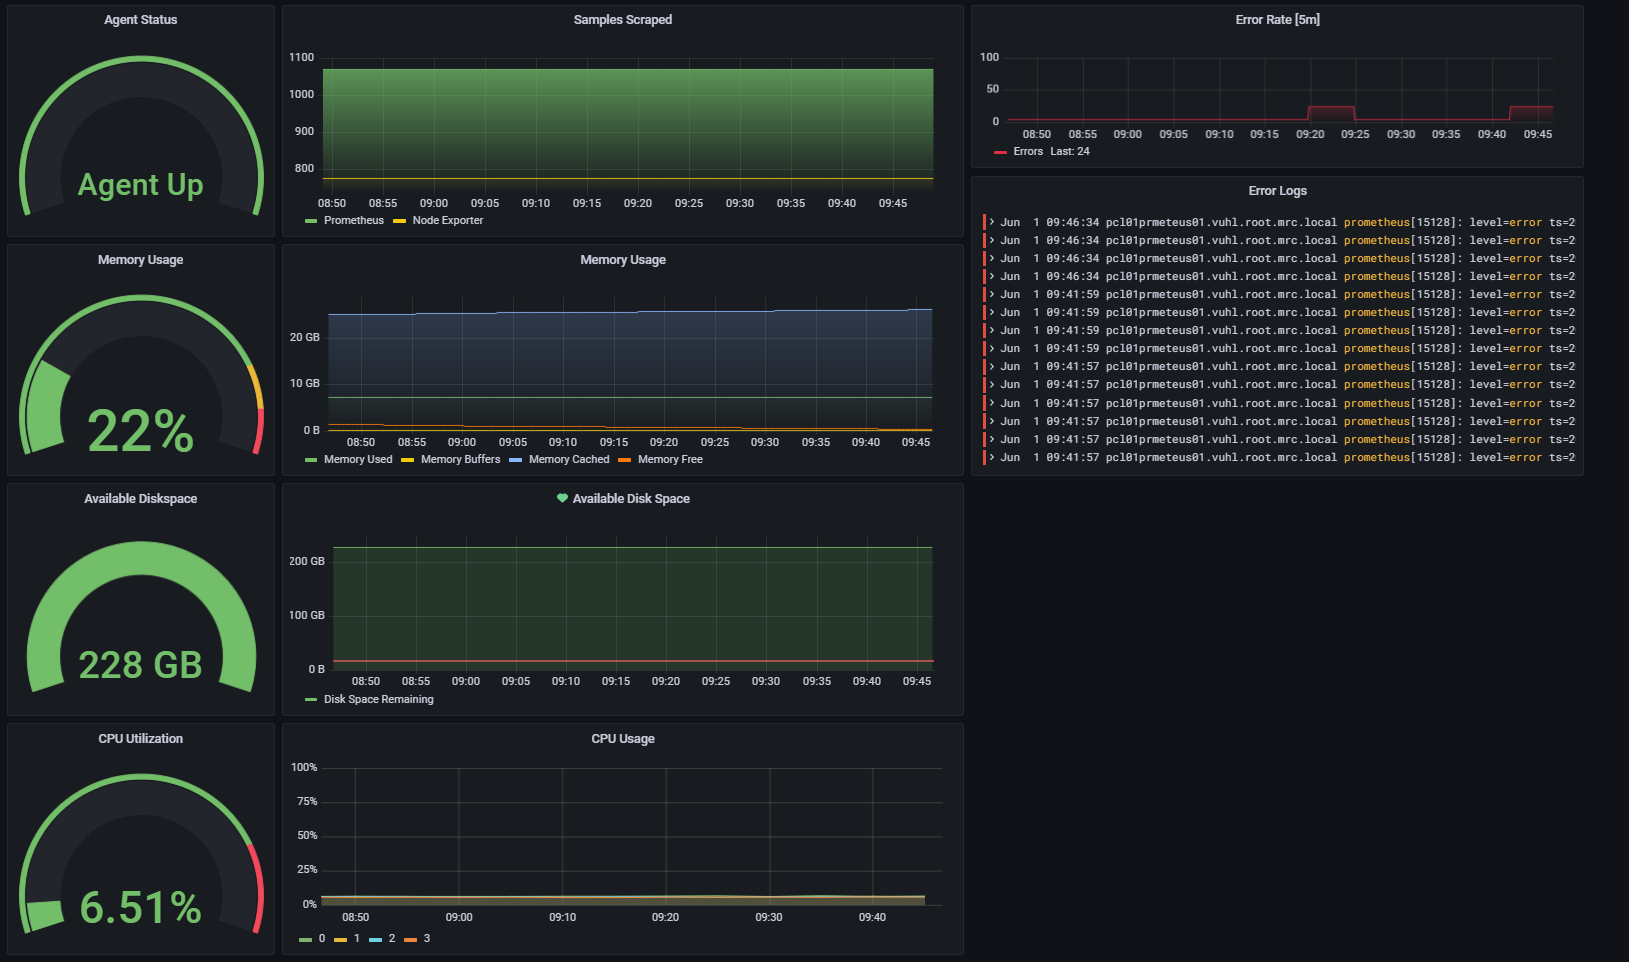 With the Windows integration in Grafana Cloud, Jackson’s team was better able to monitor infrastructure metrics like memory usage and CPU utilization.